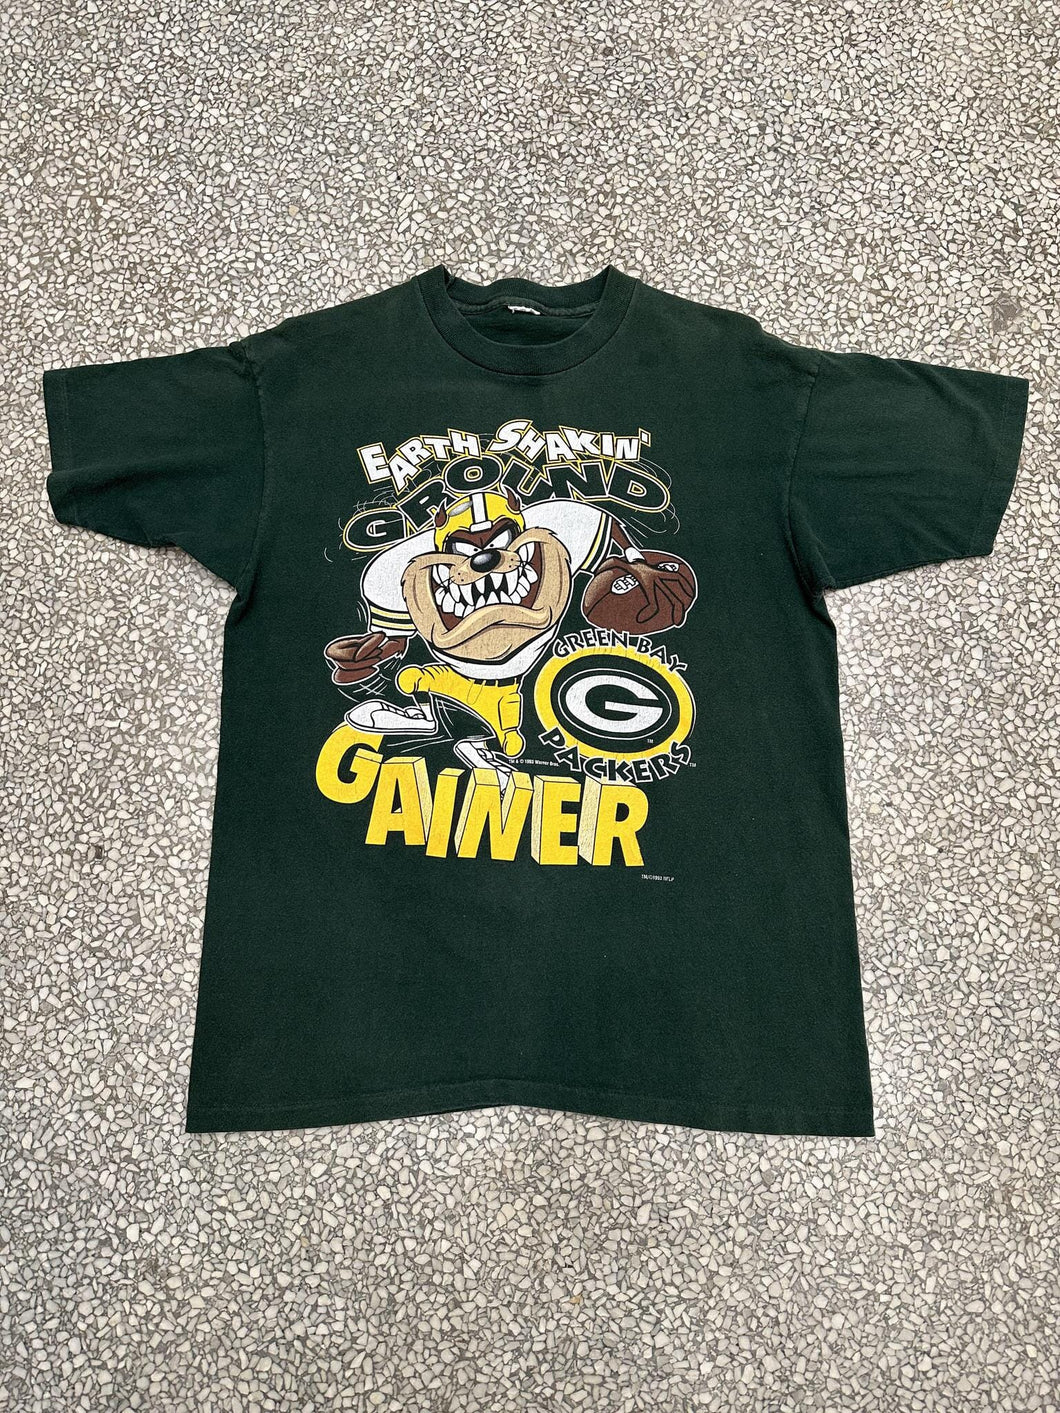 Green Bay Packers Vintage 1993 Taz Earth Shakin' Ground Gainer Faded Pine Green ABC Vintage 